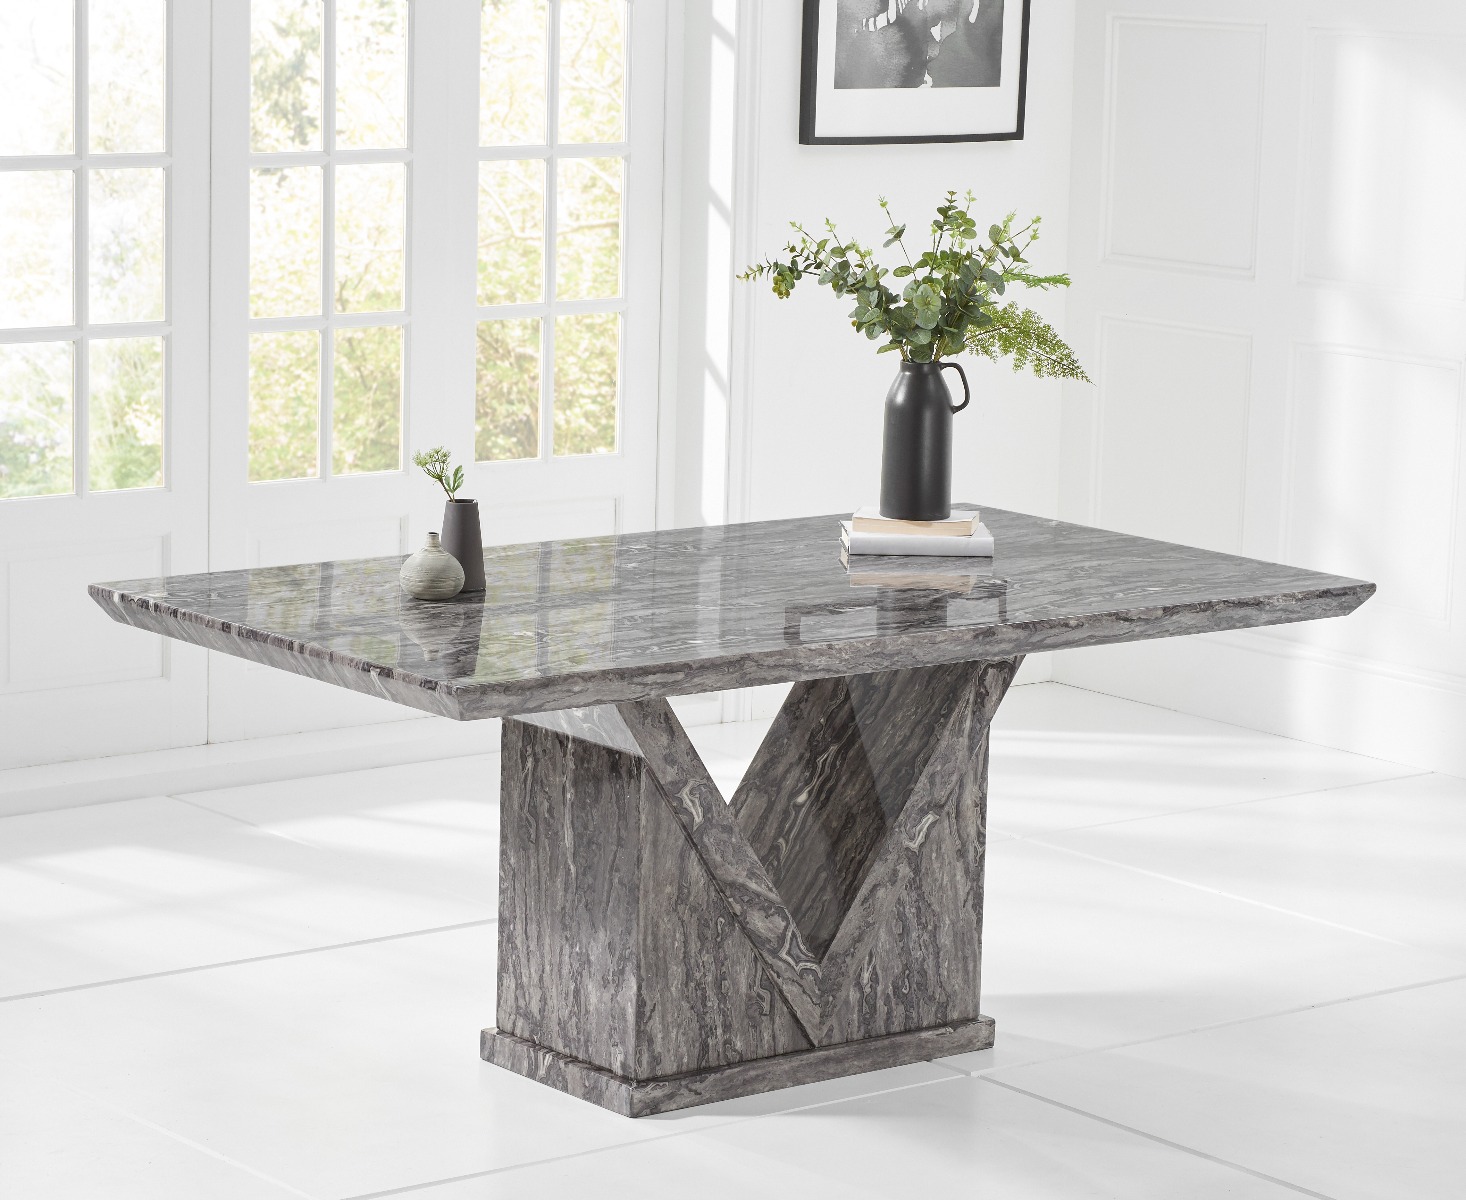 Photo 4 of Milan 160cm grey marble dining table with 6 grey francesca chairs